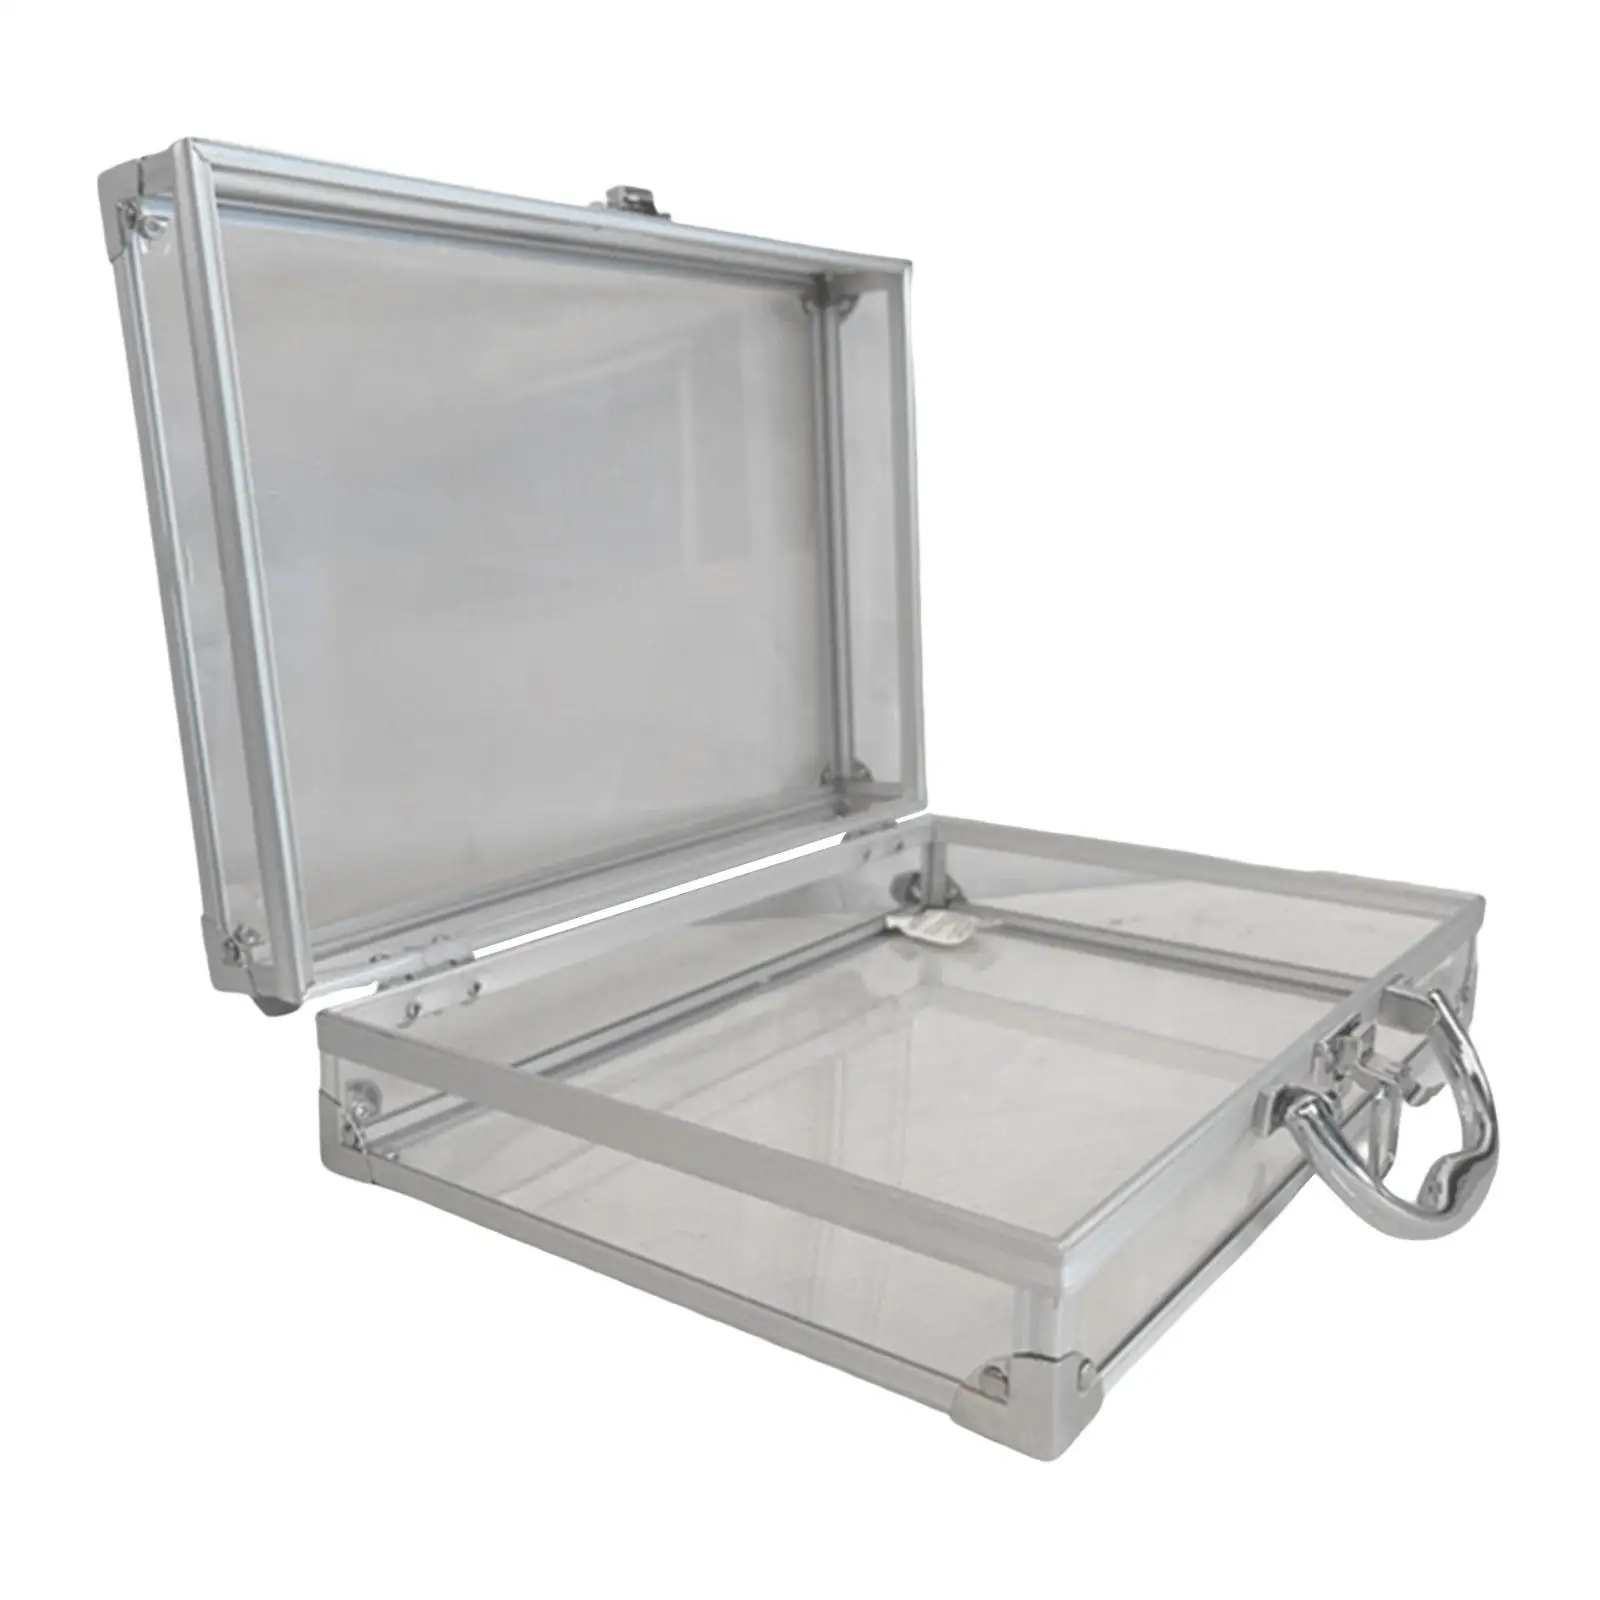 Aluminum Alloy Carrying Case PE Transparent Board with Lock Large Capacity Transparent Carrying Case Storage Case with Handle